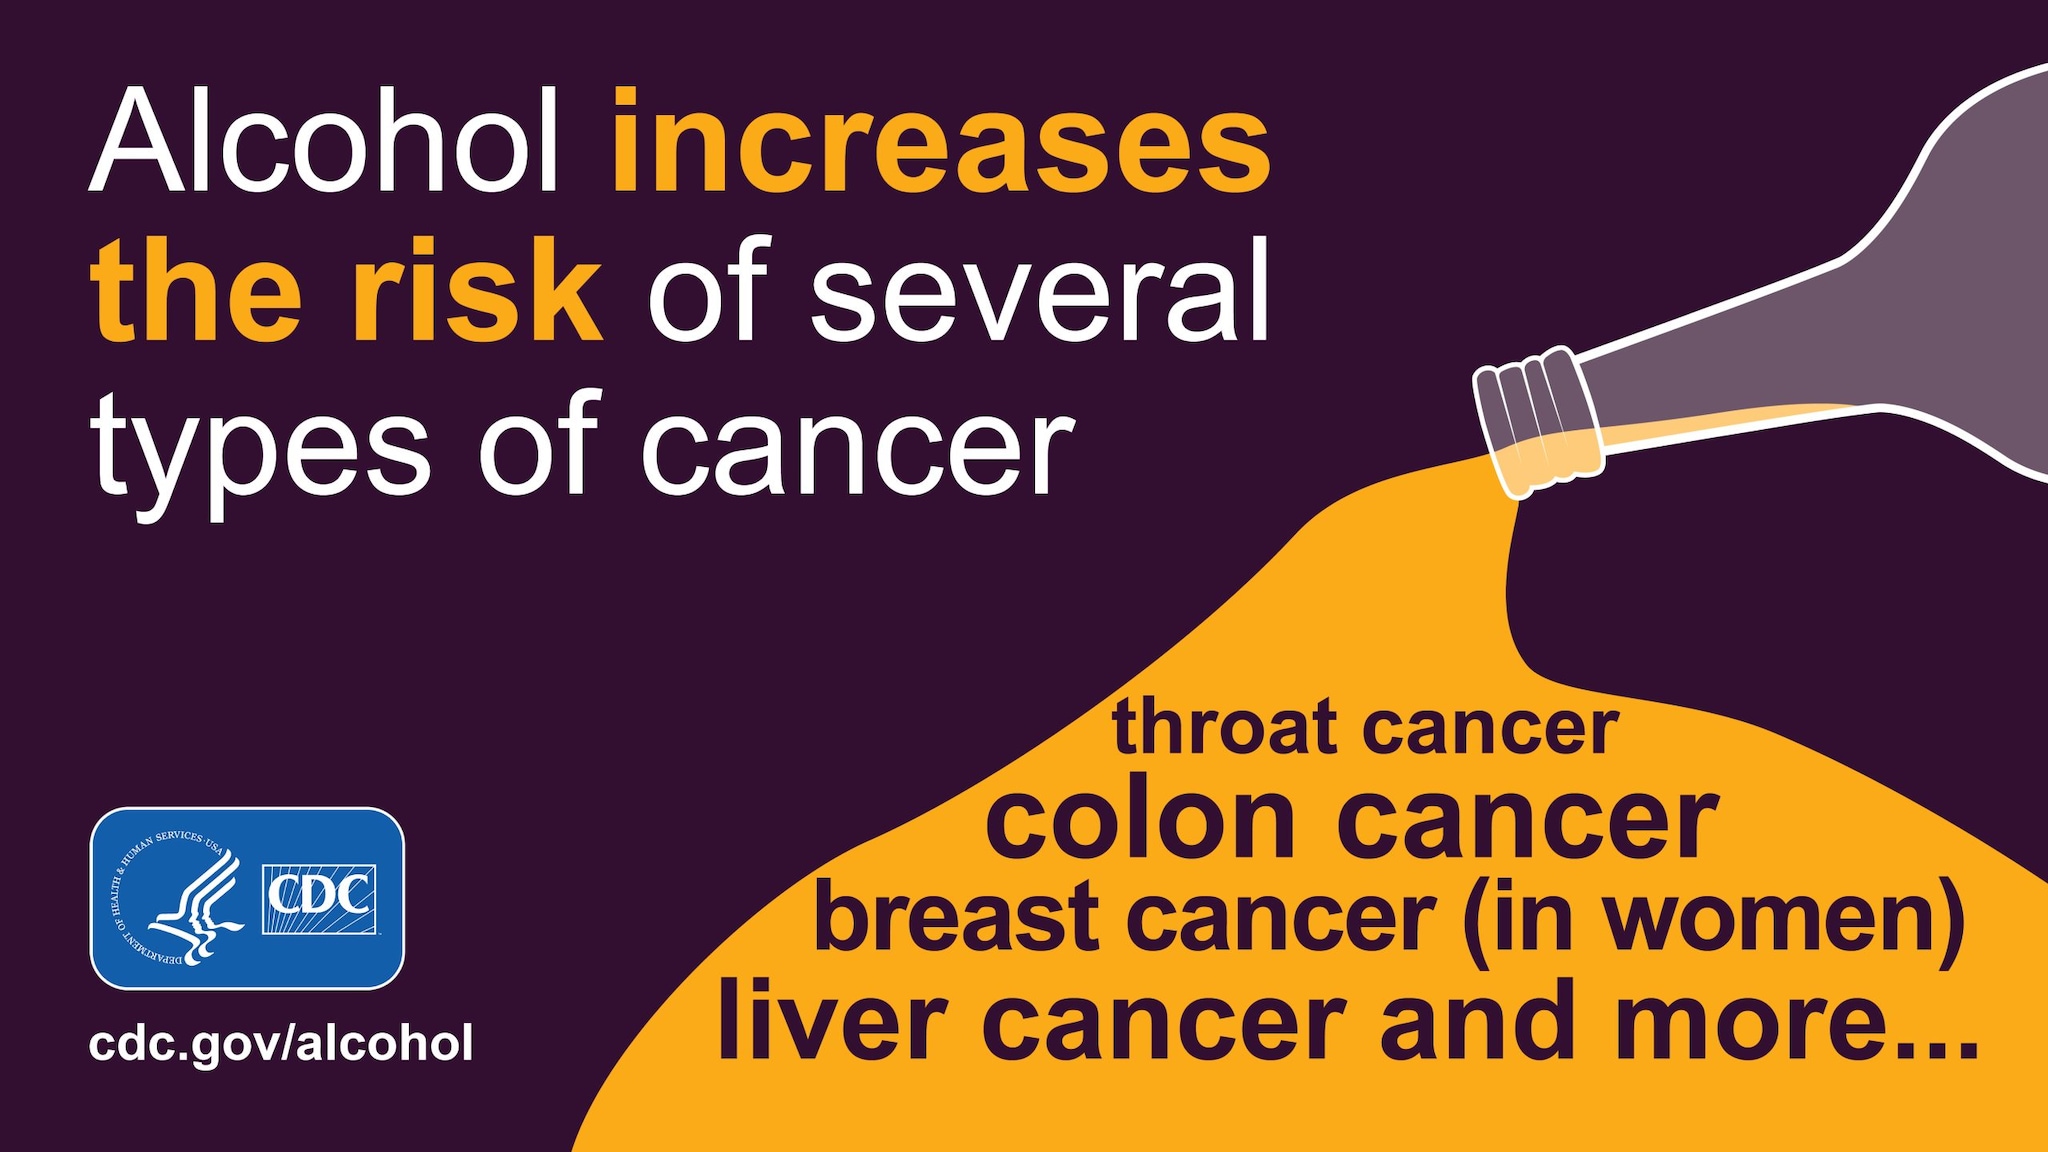 Text that says, "Alcohol increases the risk of several types of cancer: throat cancer, colon cancer, breast cancer (in women), liver cancer, and more..."